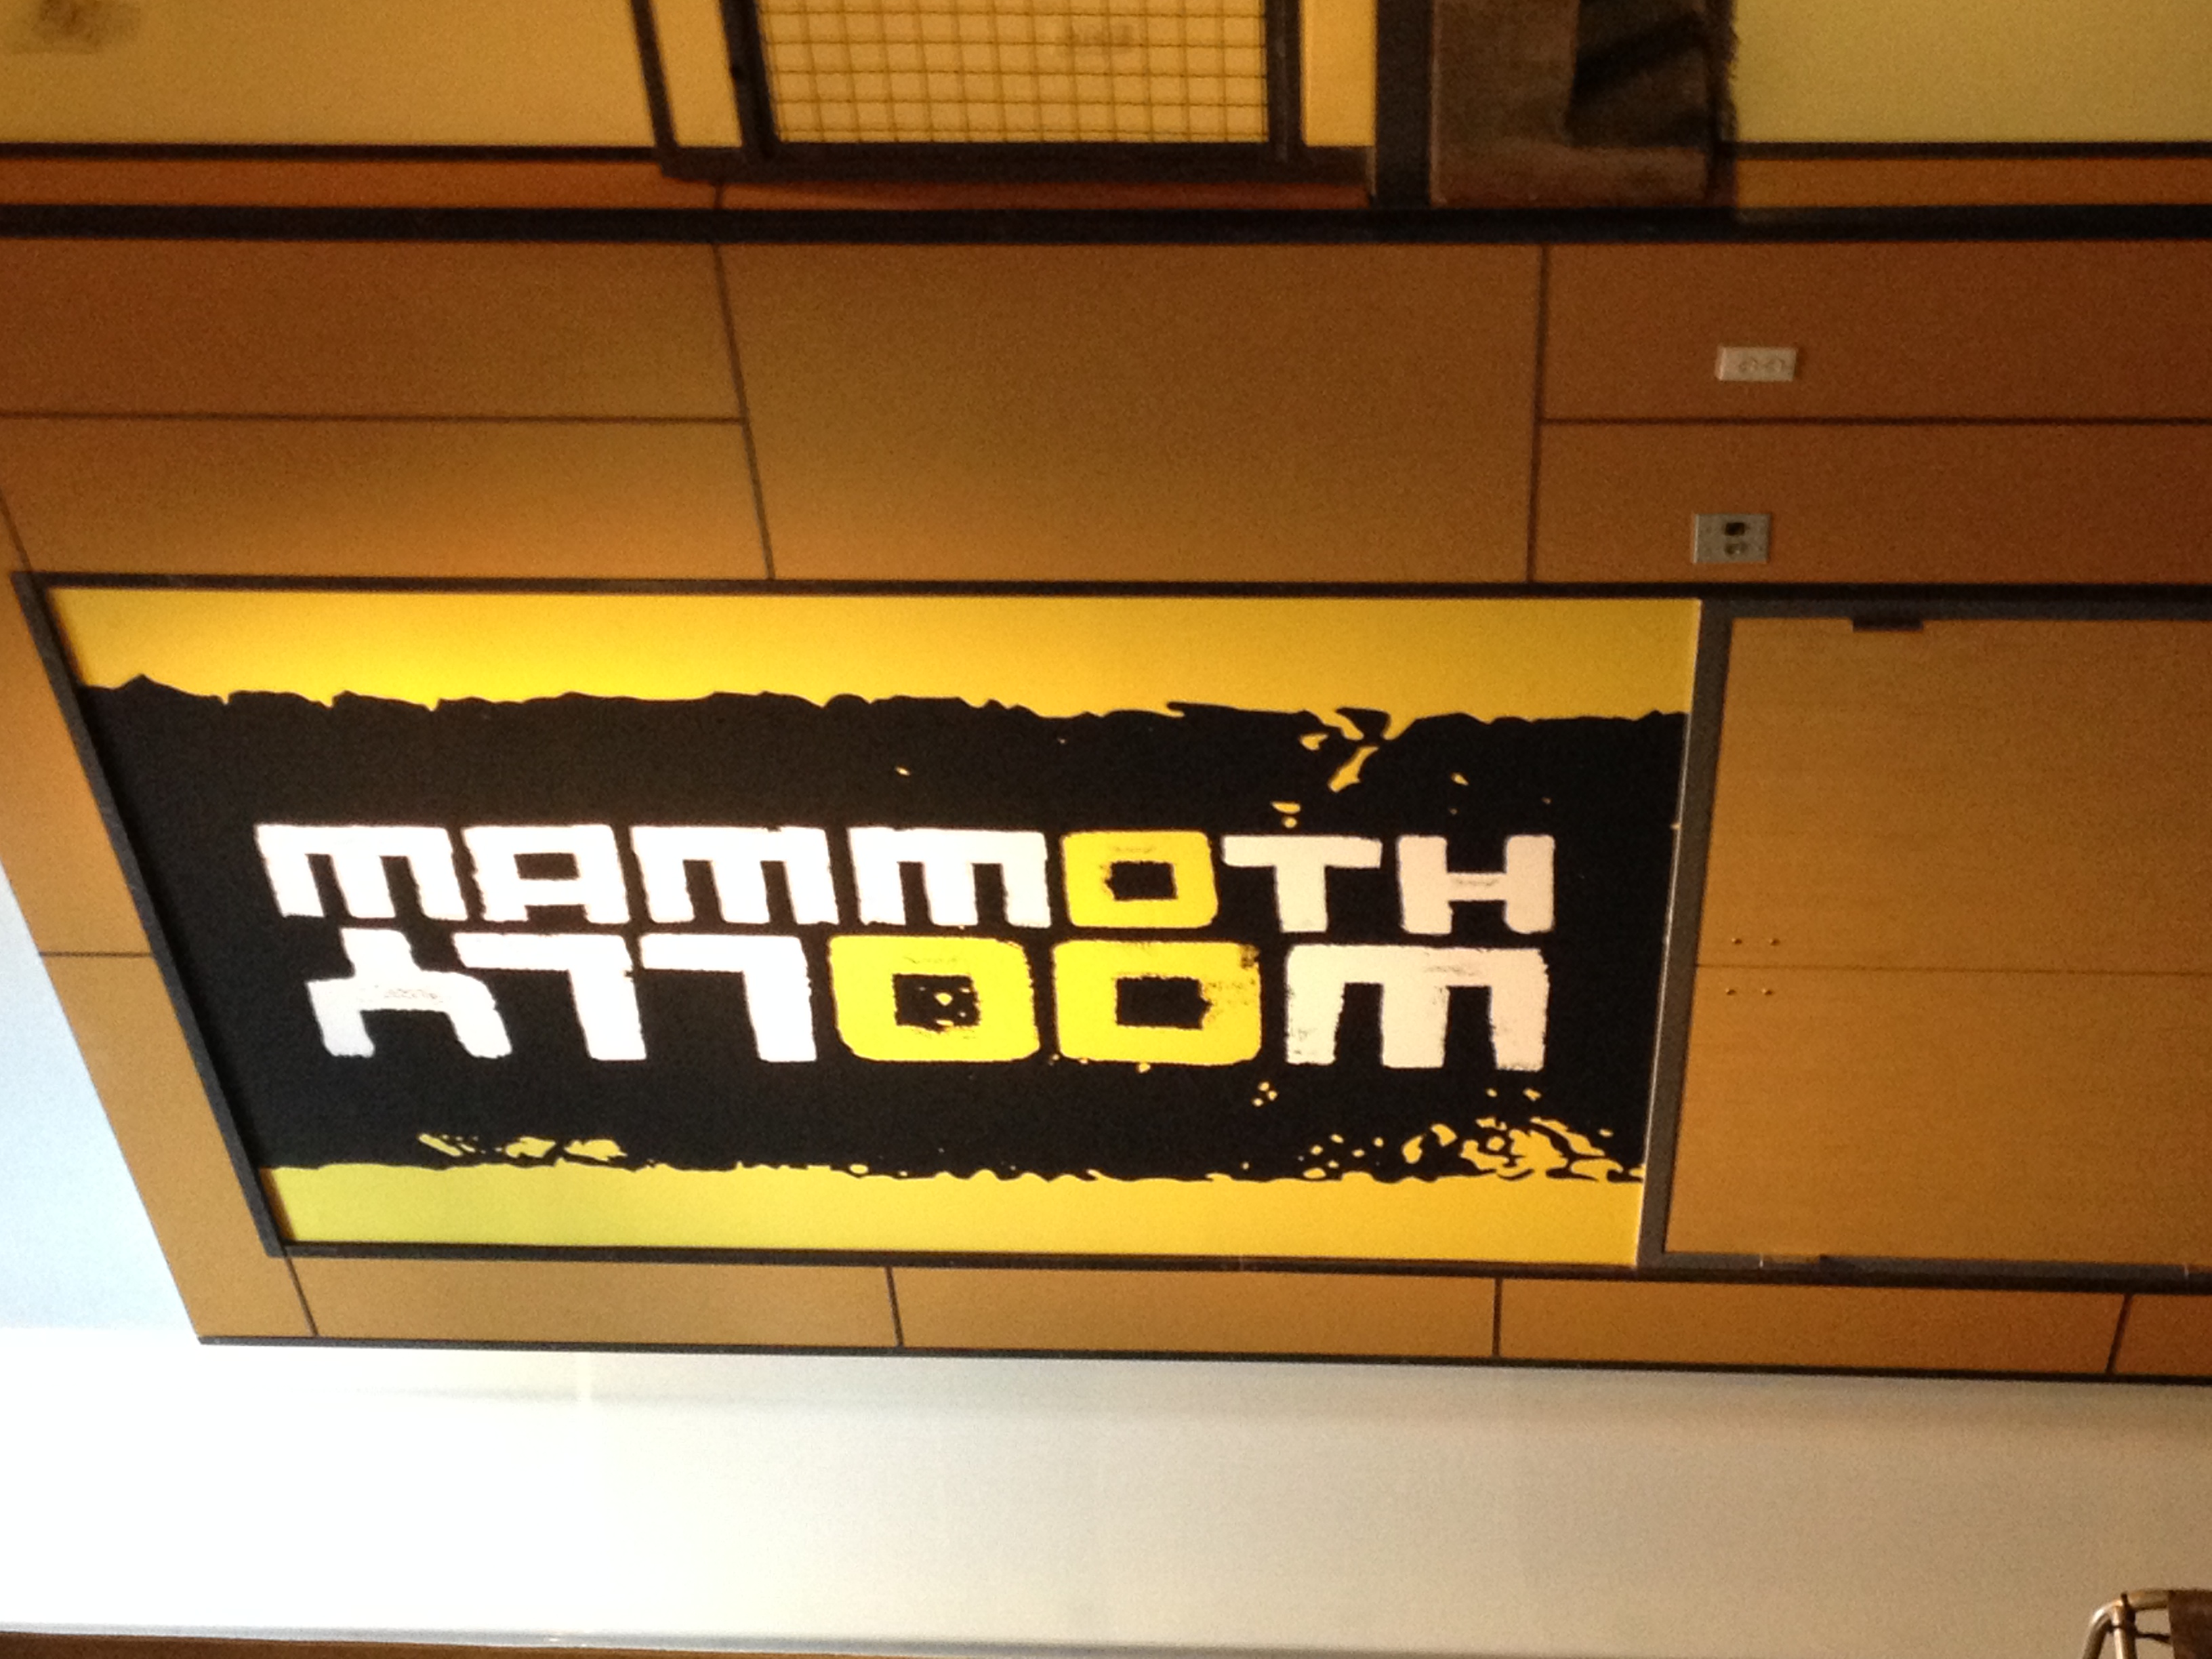 Full color print on adhesive wall fabric for Wooly Mammoth Theatre